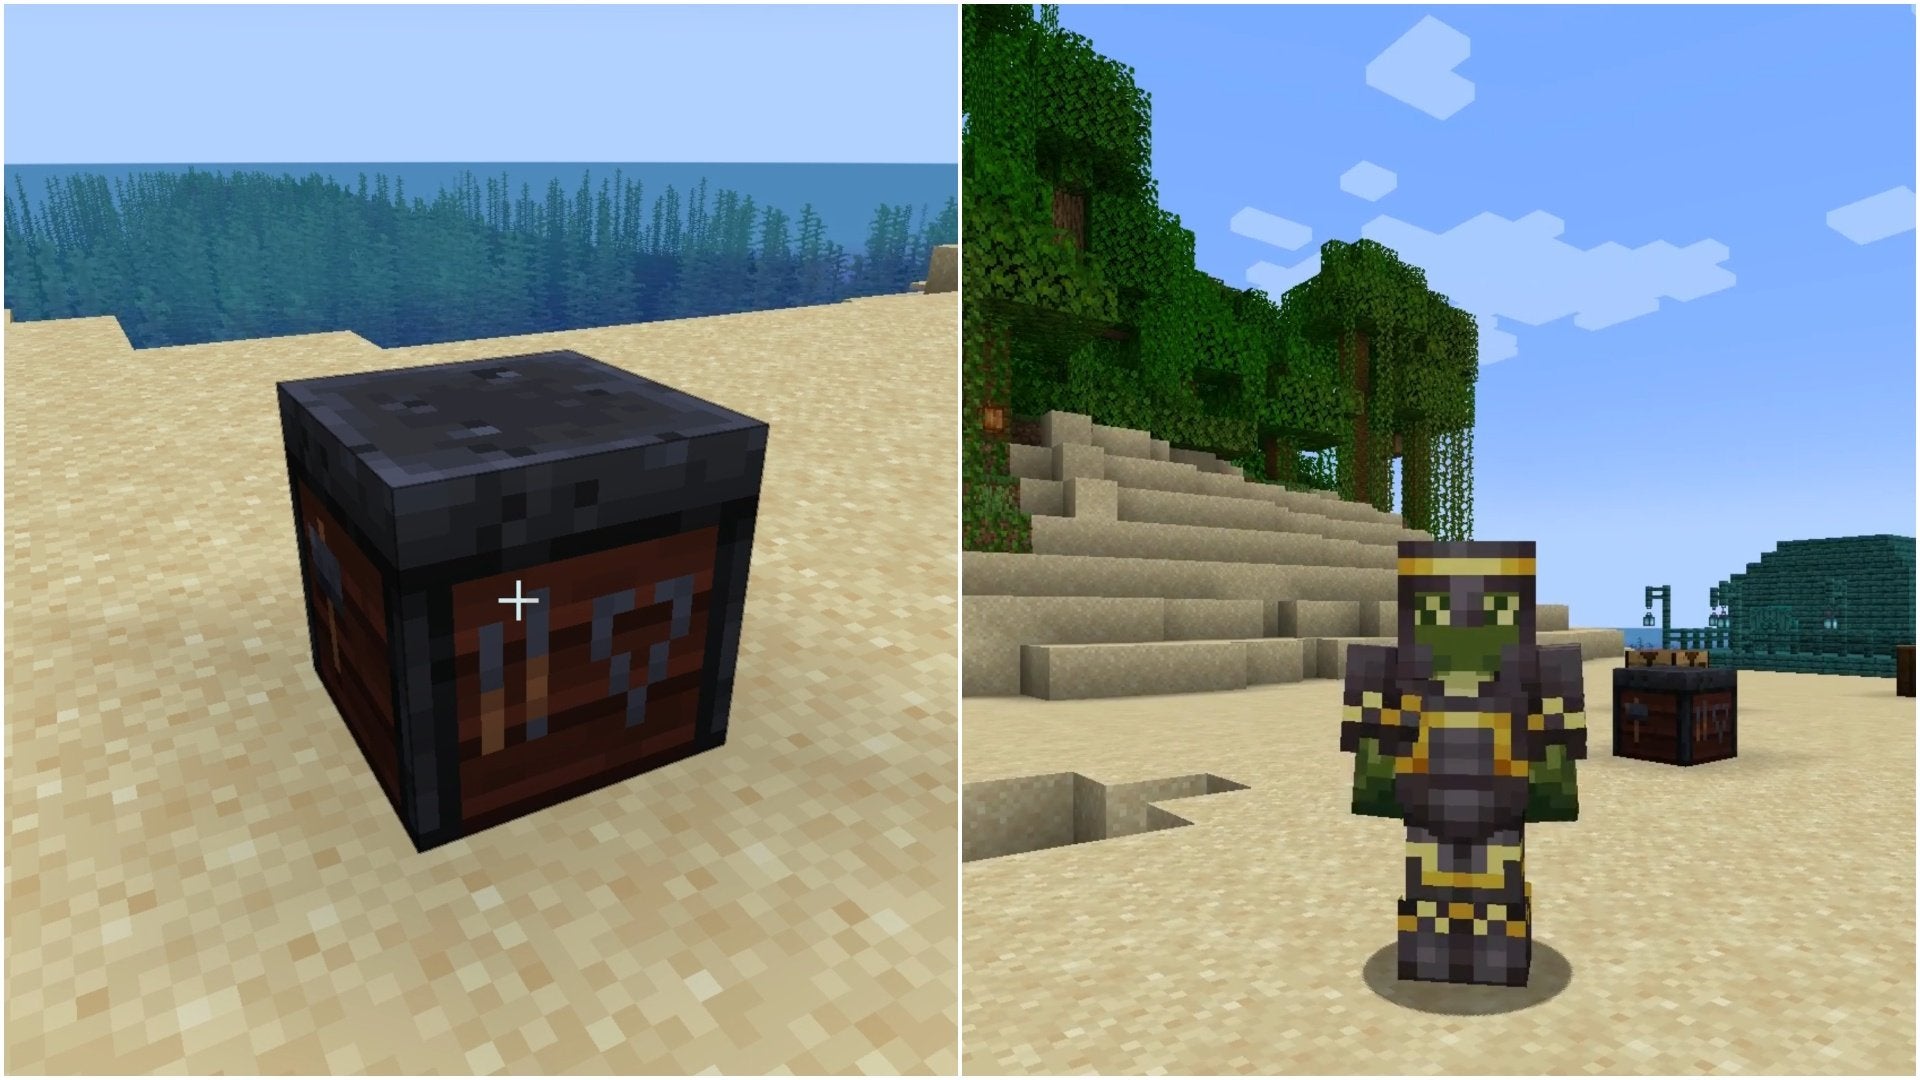 On the left is a Smithing Table on a beach and on the right is a player wearing Netherite Armor trimmed with Gold.